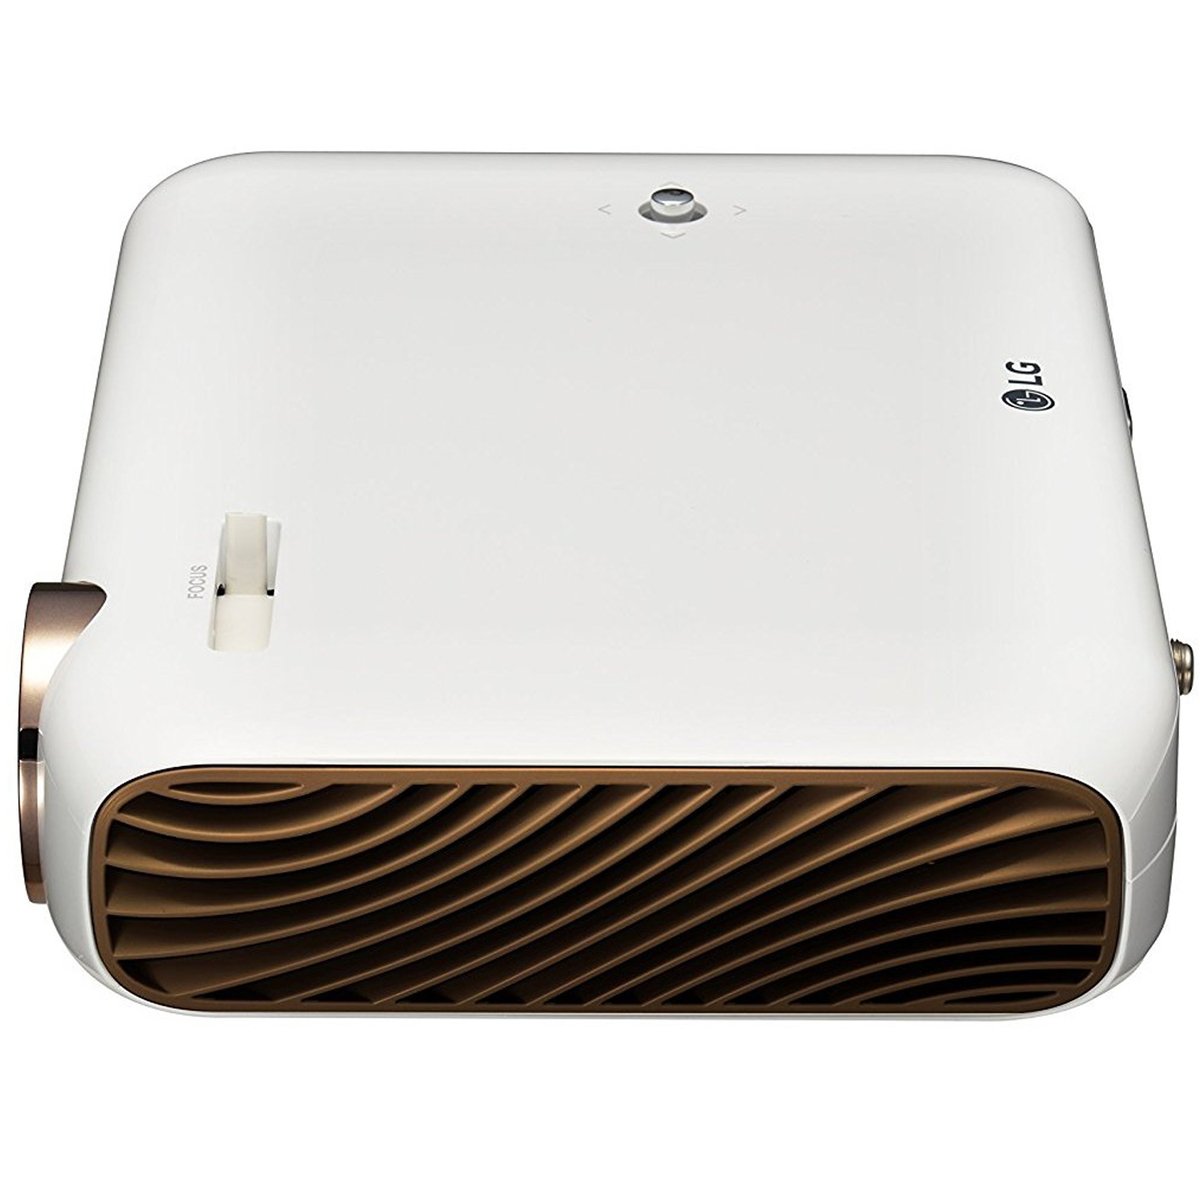 LG LED Projector PW1500